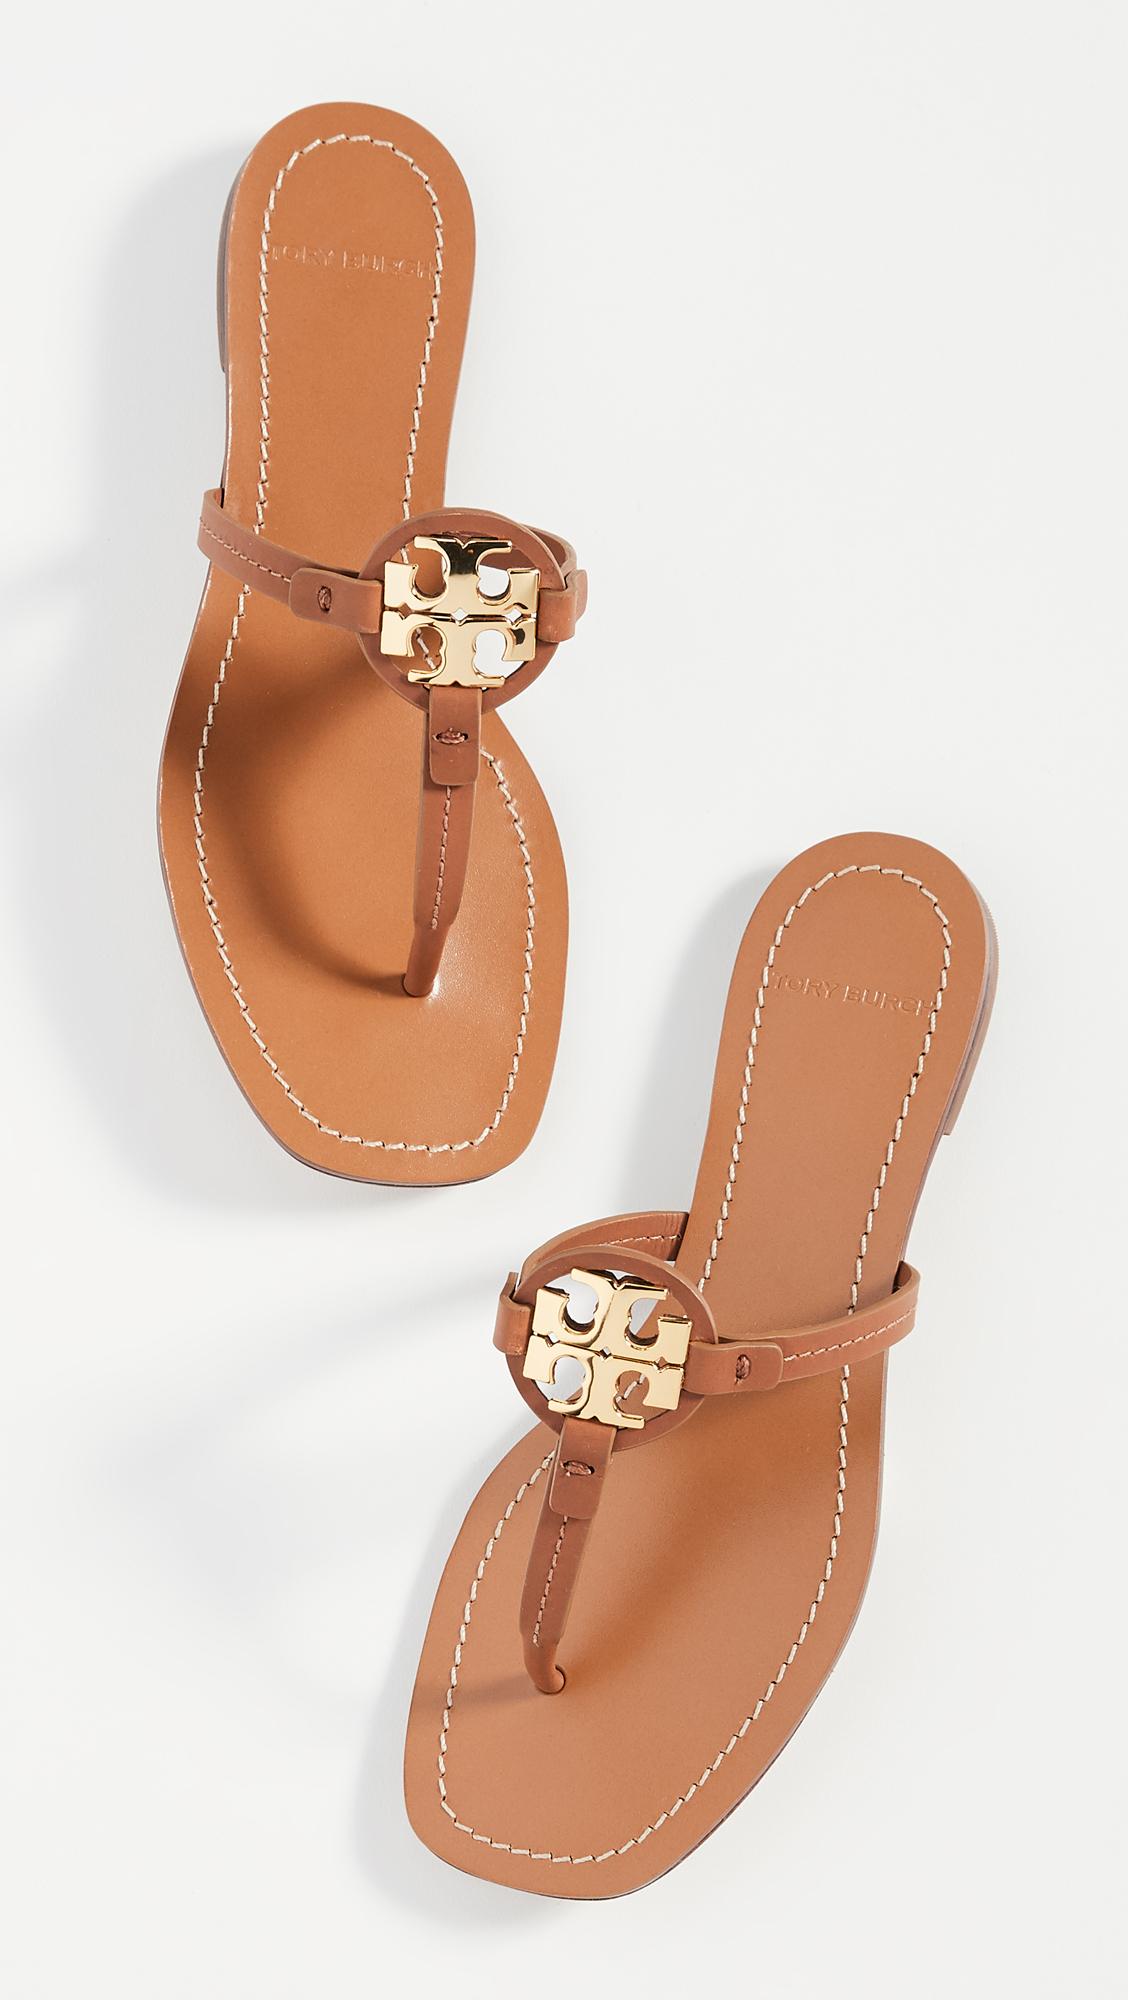 Miller Leather Thong Sandals in Beige - Tory Burch